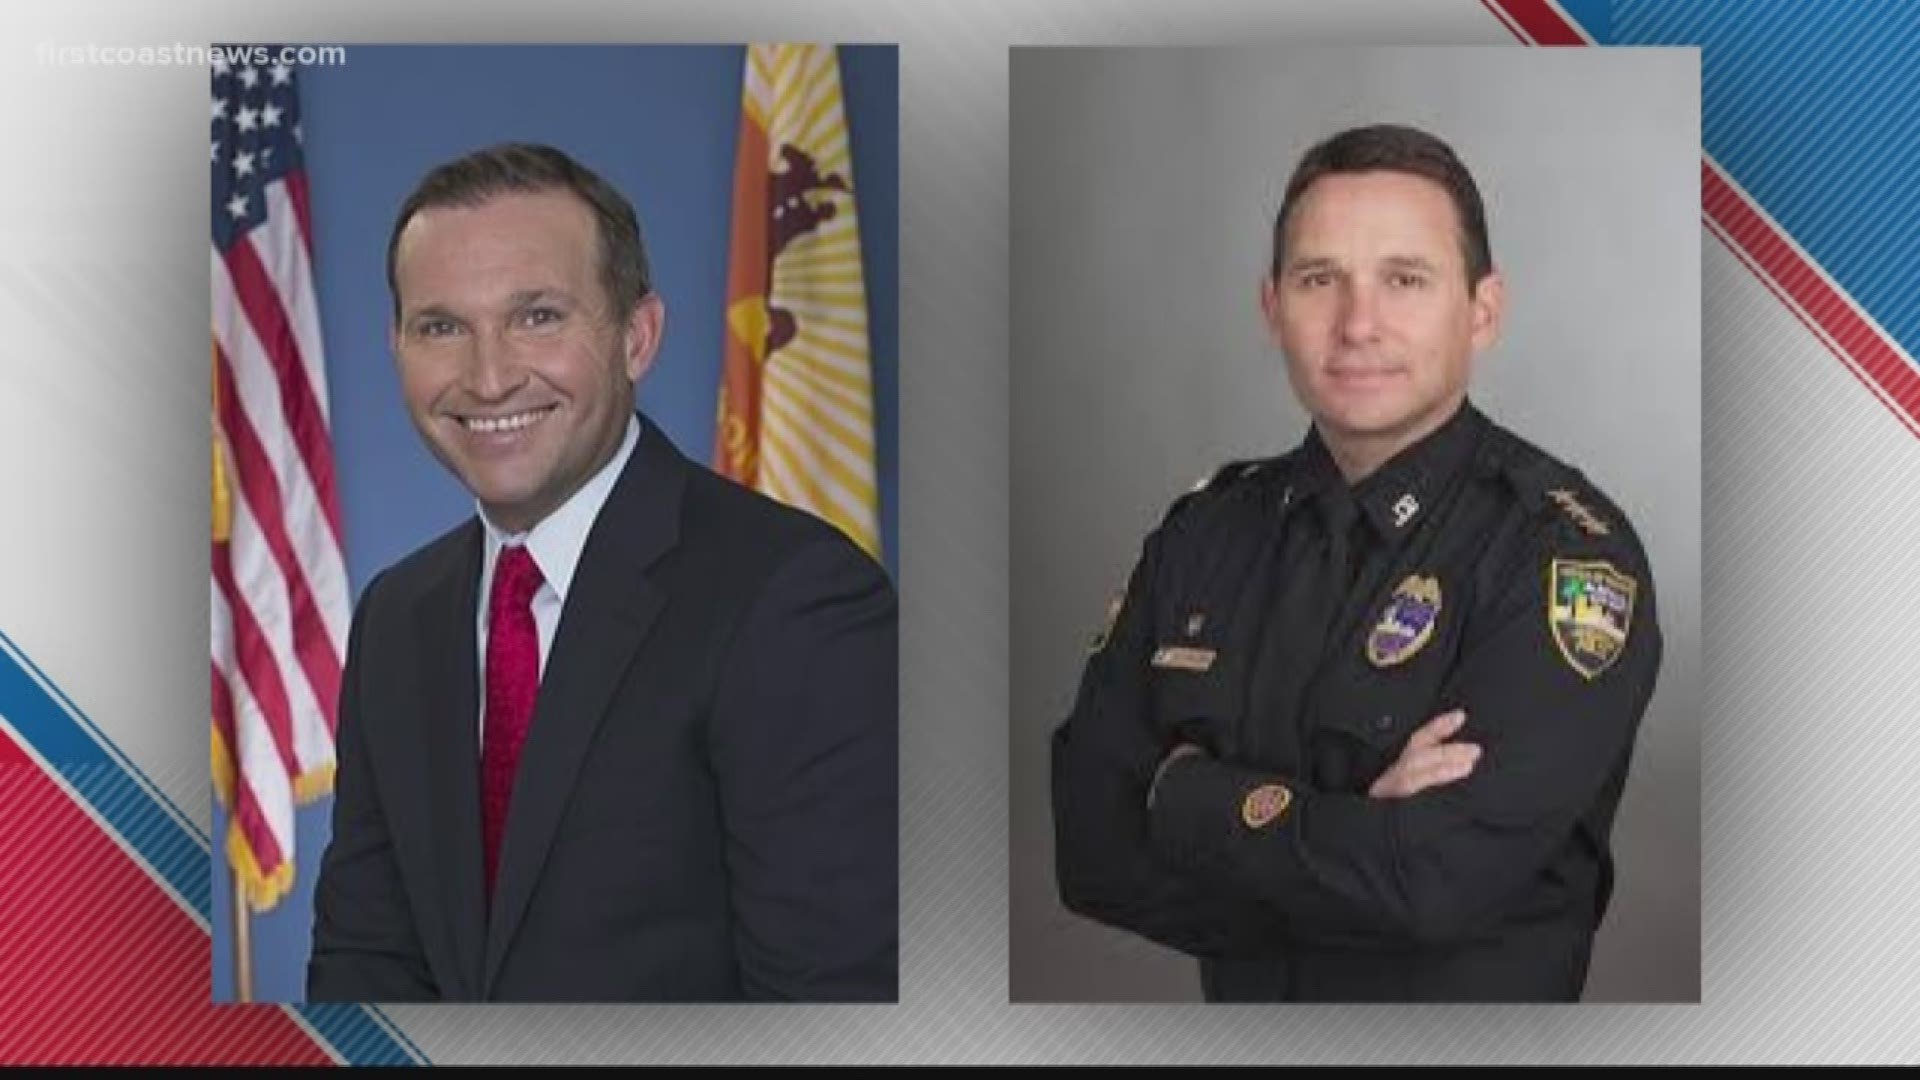 Mayor Lenny Curry defeated three opponents to win a second term. The only one he acknowledged in his acceptance remarks was Omega Allen, the No Party affiliation candidate.